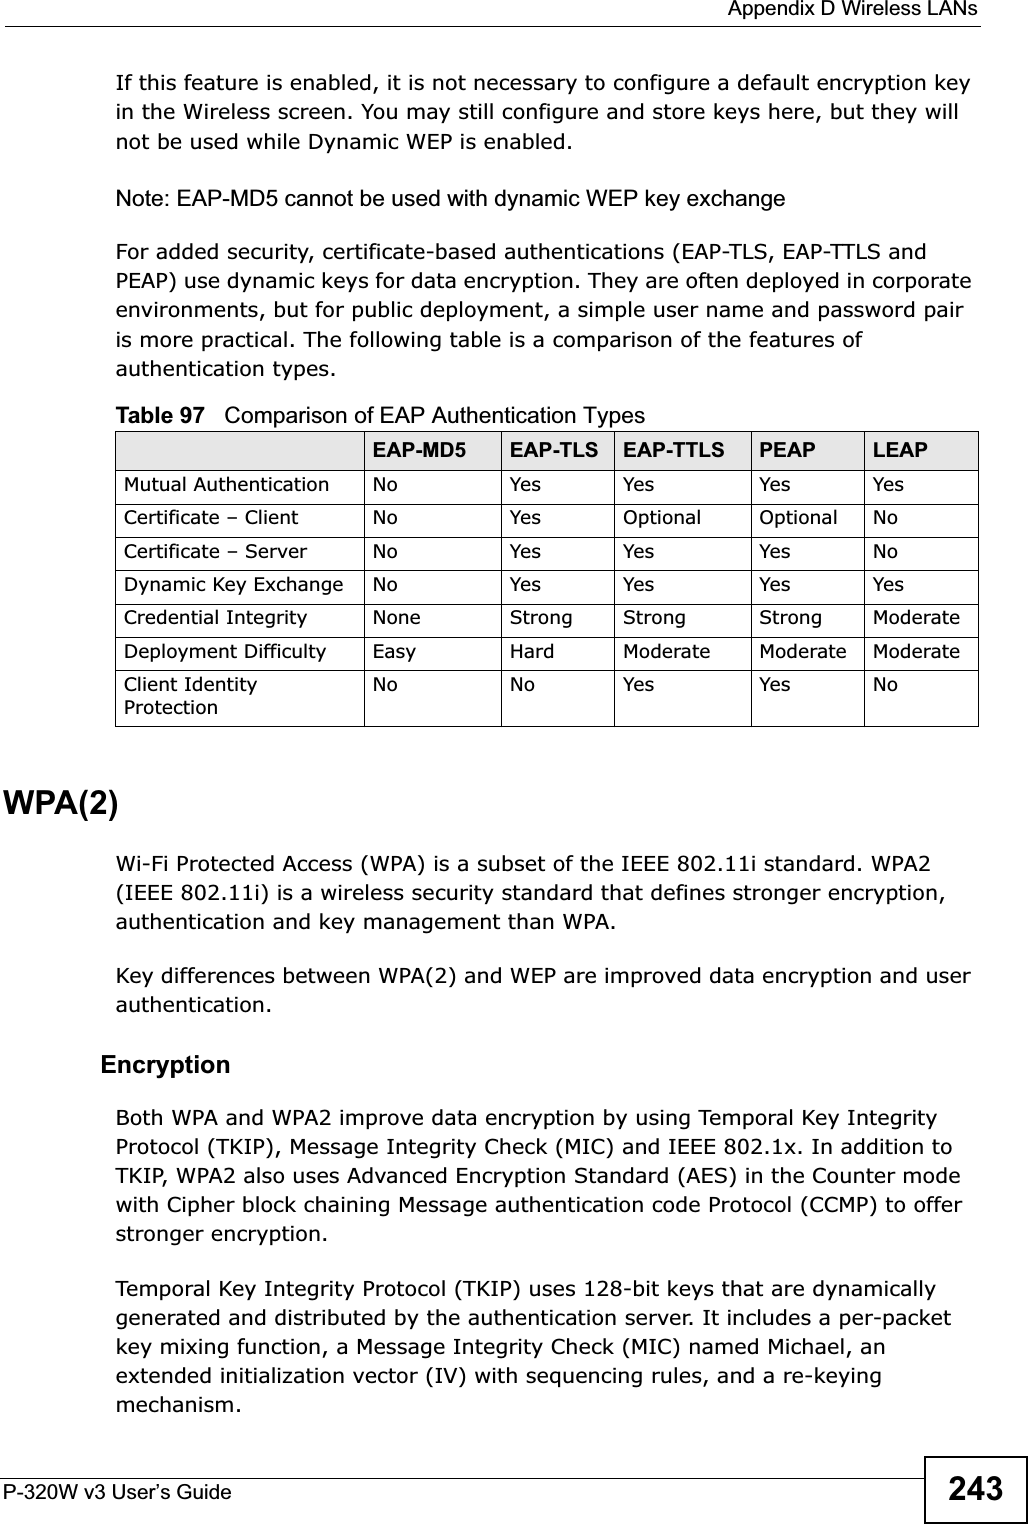  Appendix D Wireless LANsP-320W v3 User’s Guide 243If this feature is enabled, it is not necessary to configure a default encryption key in the Wireless screen. You may still configure and store keys here, but they will not be used while Dynamic WEP is enabled.Note: EAP-MD5 cannot be used with dynamic WEP key exchangeFor added security, certificate-based authentications (EAP-TLS, EAP-TTLS and PEAP) use dynamic keys for data encryption. They are often deployed in corporate environments, but for public deployment, a simple user name and password pair is more practical. The following table is a comparison of the features of authentication types.WPA(2)Wi-Fi Protected Access (WPA) is a subset of the IEEE 802.11i standard. WPA2 (IEEE 802.11i) is a wireless security standard that defines stronger encryption, authentication and key management than WPA. Key differences between WPA(2) and WEP are improved data encryption and user authentication.    EncryptionBoth WPA and WPA2 improve data encryption by using Temporal Key Integrity Protocol (TKIP), Message Integrity Check (MIC) and IEEE 802.1x. In addition to TKIP, WPA2 also uses Advanced Encryption Standard (AES) in the Counter mode with Cipher block chaining Message authentication code Protocol (CCMP) to offer stronger encryption. Temporal Key Integrity Protocol (TKIP) uses 128-bit keys that are dynamically generated and distributed by the authentication server. It includes a per-packet key mixing function, a Message Integrity Check (MIC) named Michael, an extended initialization vector (IV) with sequencing rules, and a re-keying mechanism.Table 97   Comparison of EAP Authentication TypesEAP-MD5 EAP-TLS EAP-TTLS PEAP LEAPMutual Authentication No Yes Yes Yes YesCertificate – Client No Yes Optional Optional NoCertificate – Server No Yes Yes Yes NoDynamic Key Exchange No Yes Yes Yes YesCredential Integrity None Strong Strong Strong ModerateDeployment Difficulty Easy Hard Moderate Moderate ModerateClient Identity ProtectionNo No Yes Yes No